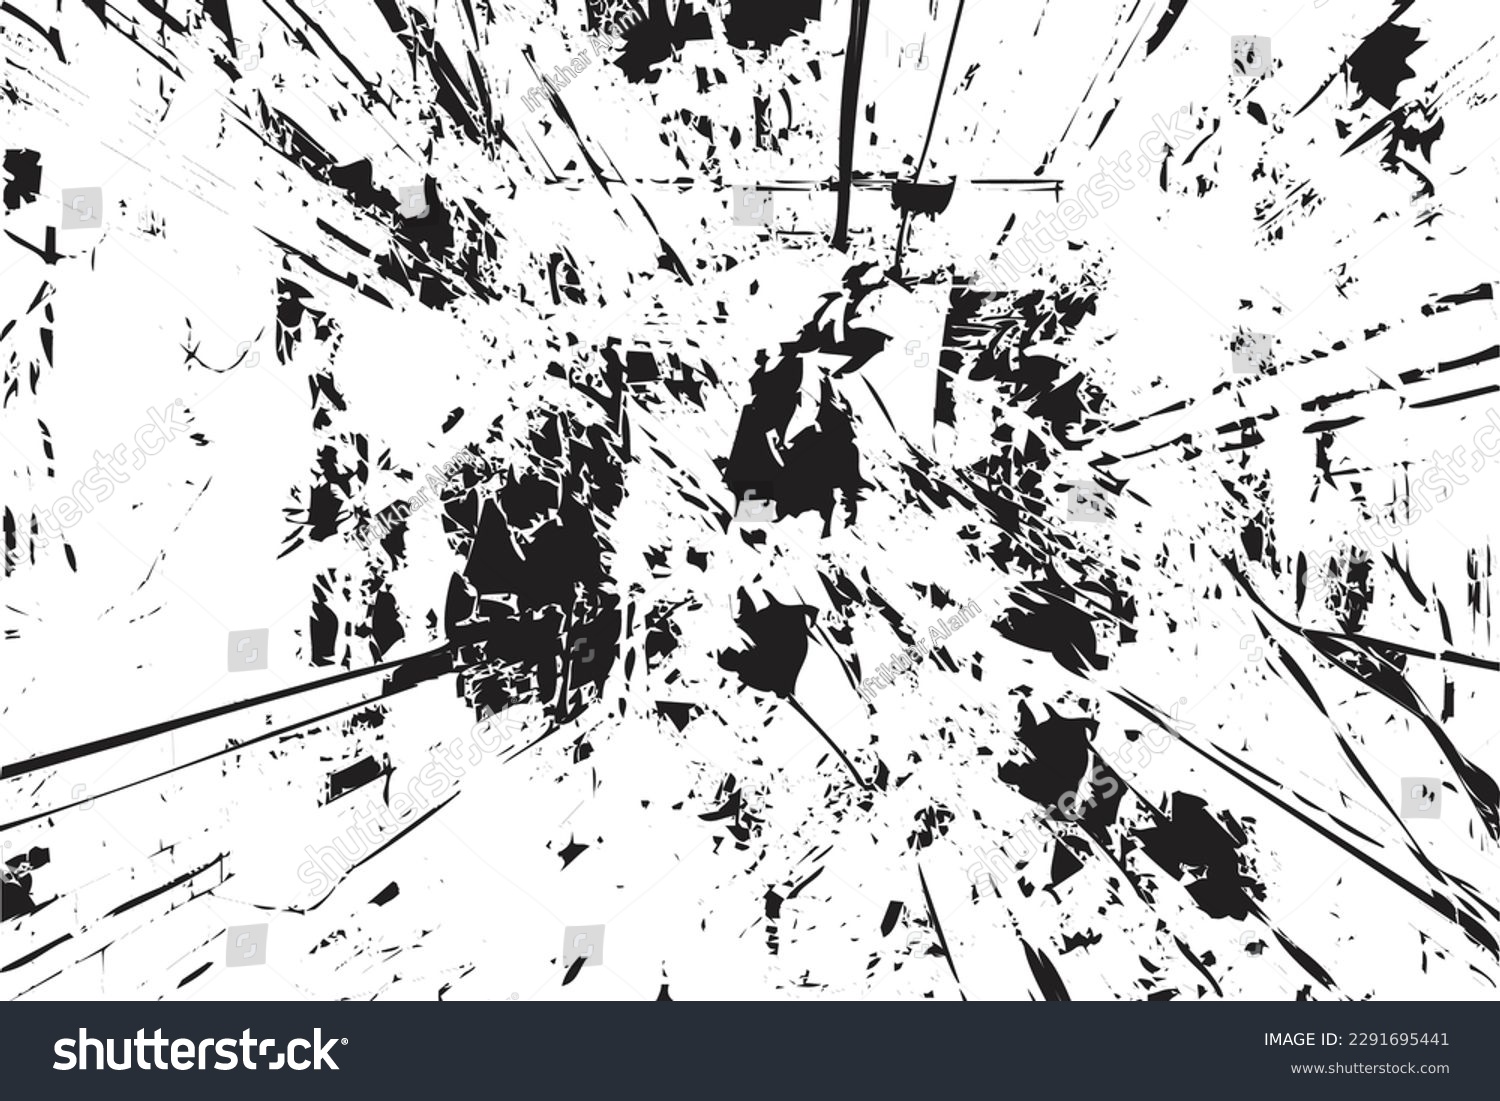 SVG of Broken glass texture effect on a white background. Stained surface and broken glass grunge effect vector. Rusty background and dust grunge effect vector with black and white colors. svg